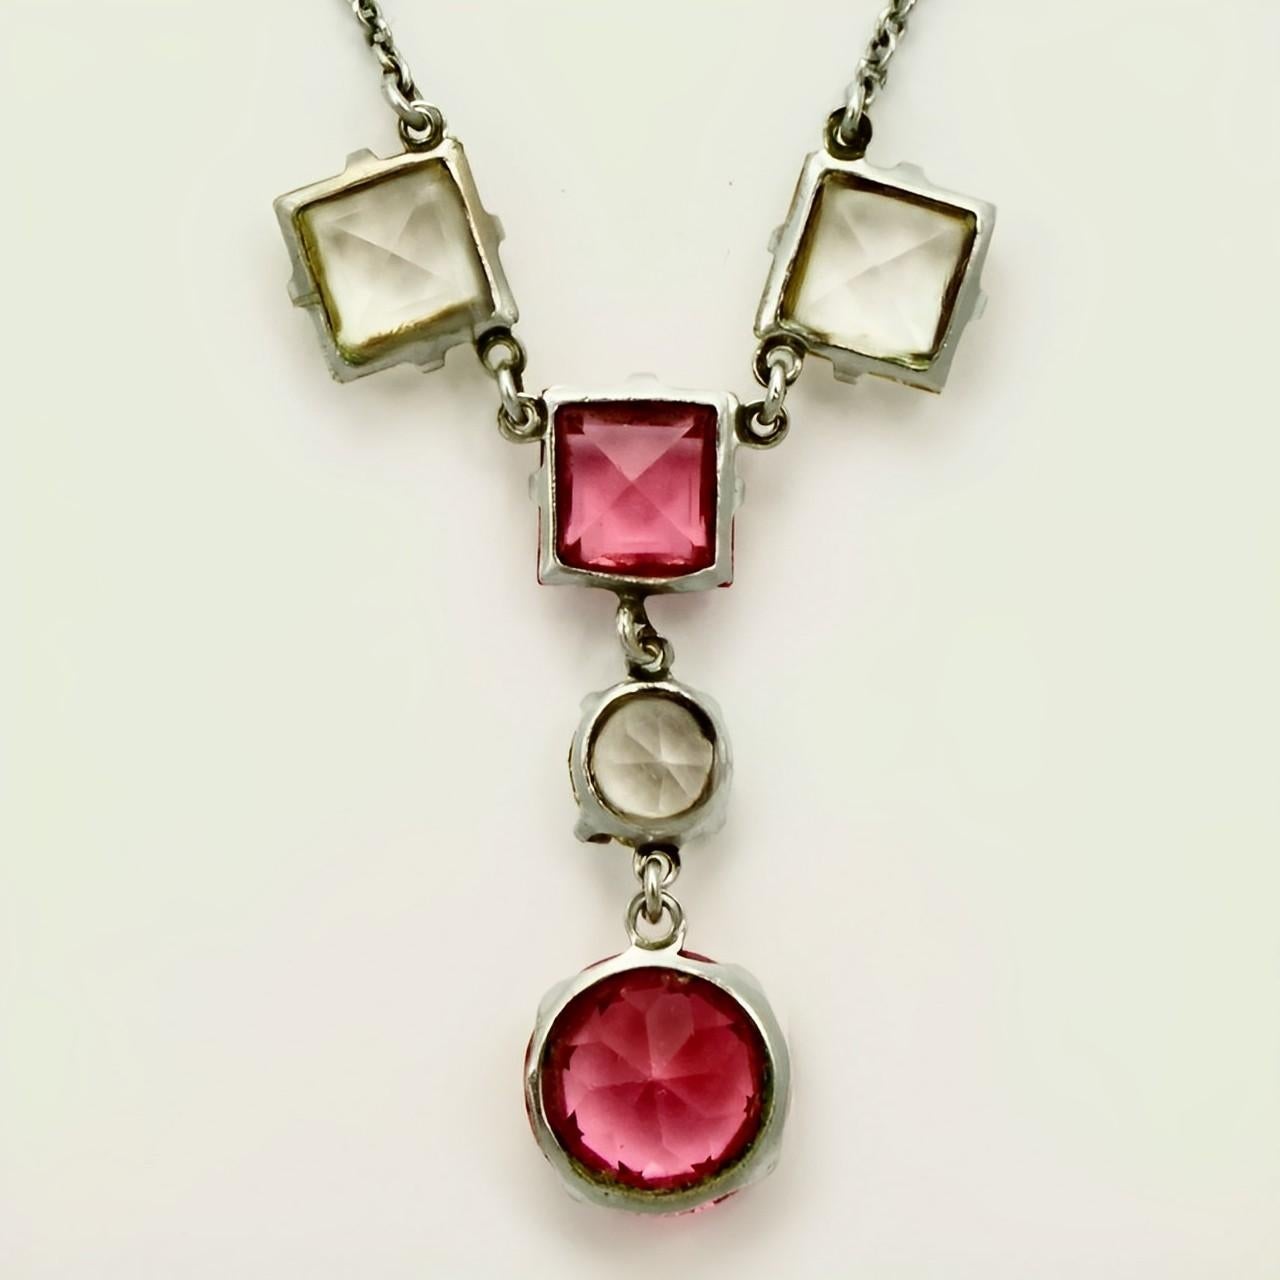 Women's or Men's Art Deco Silver Tone Drop Pendant Necklace with Rouge Pink Clear Glass Crystals For Sale